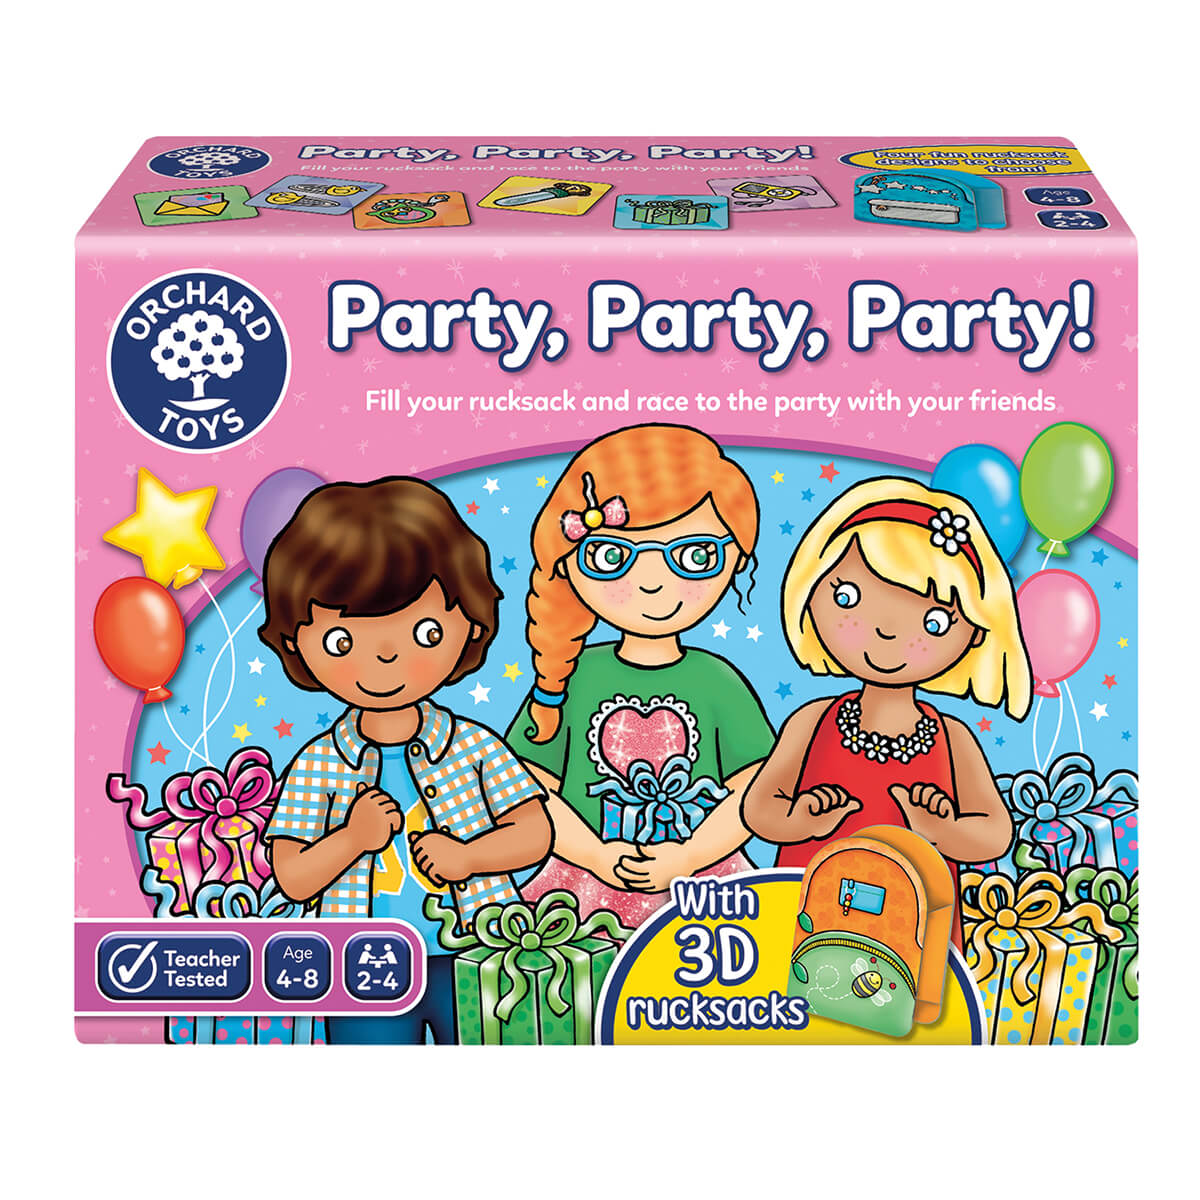 Party, Party, Party Game - Steam Rocket